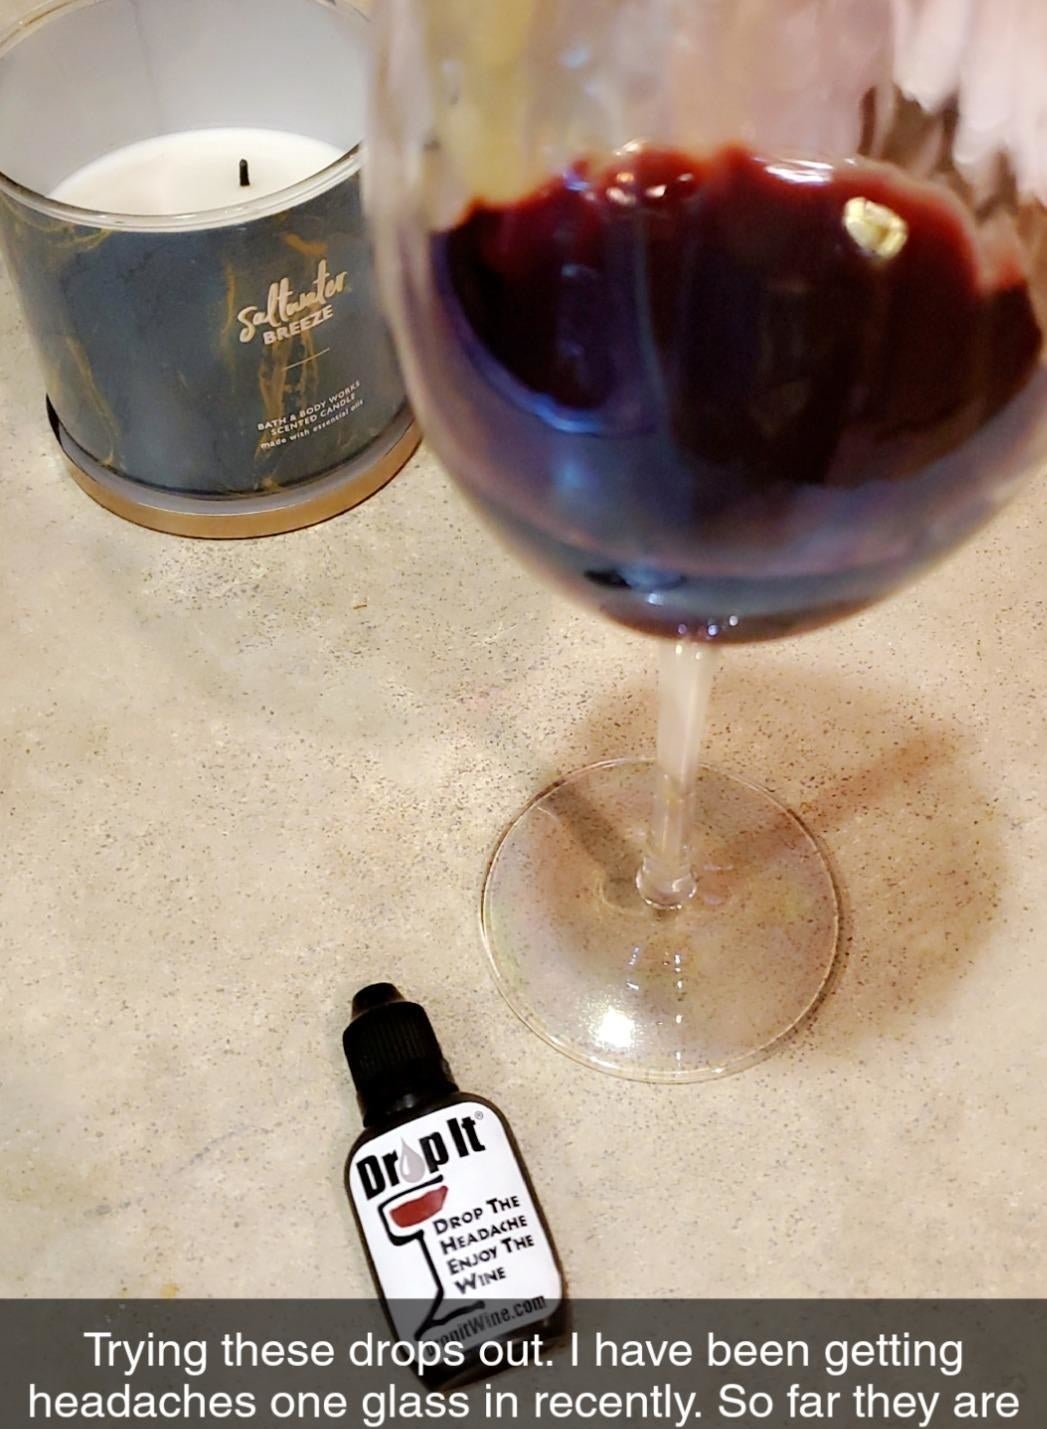 a glass of wine and the dropper bottle with text reading &quot;trying these drops out. I&#x27;ve been getting headaches one glass in recently. So far they are working and it makes the wine really smooth.&quot; 